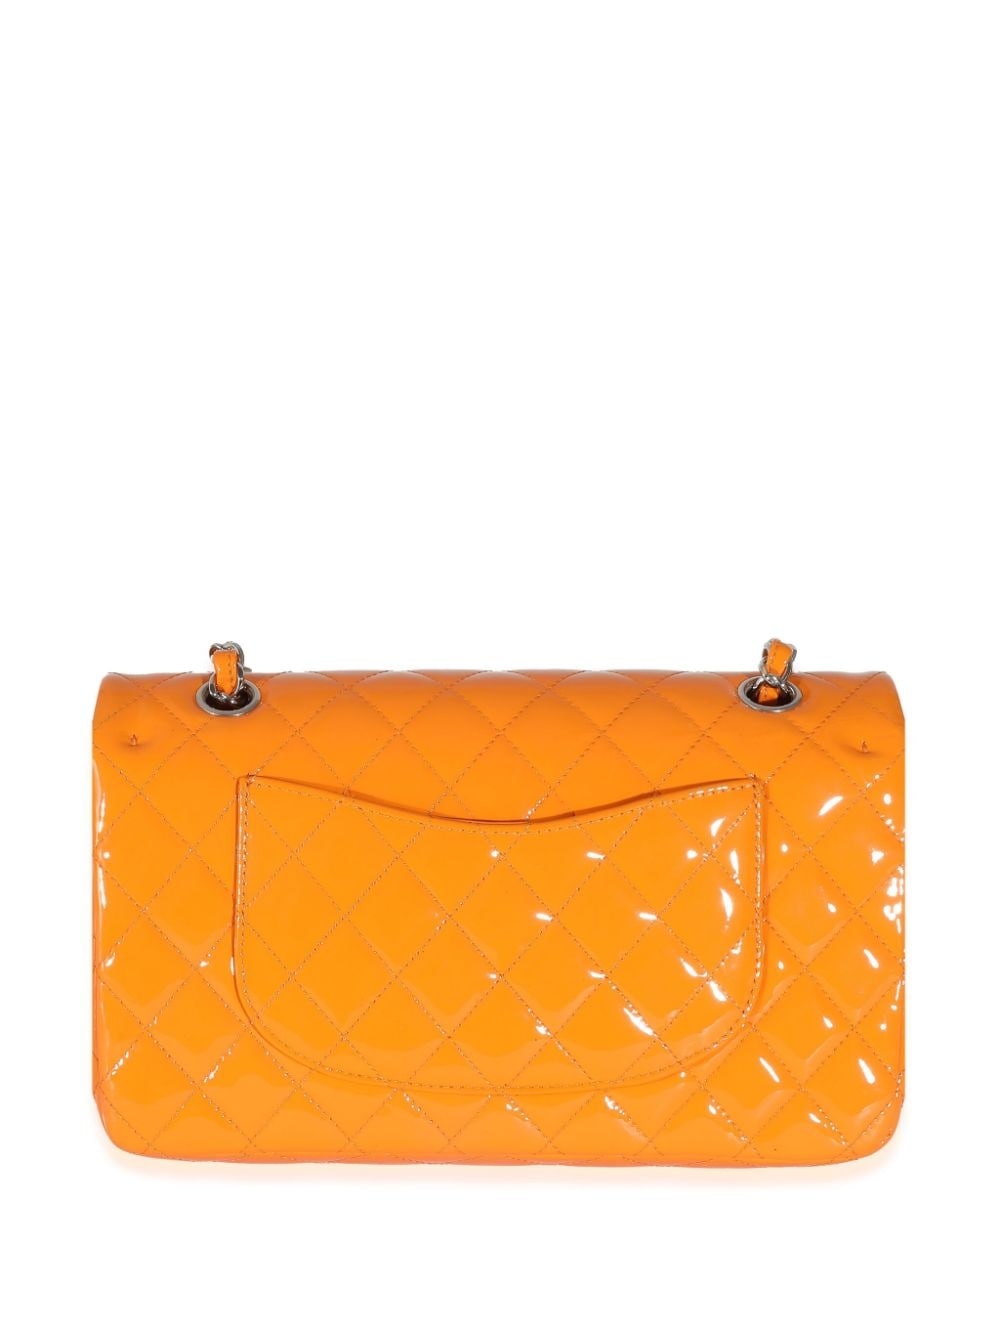 Pre-owned Chanel Medium Classic Double Flap Bag In Orange